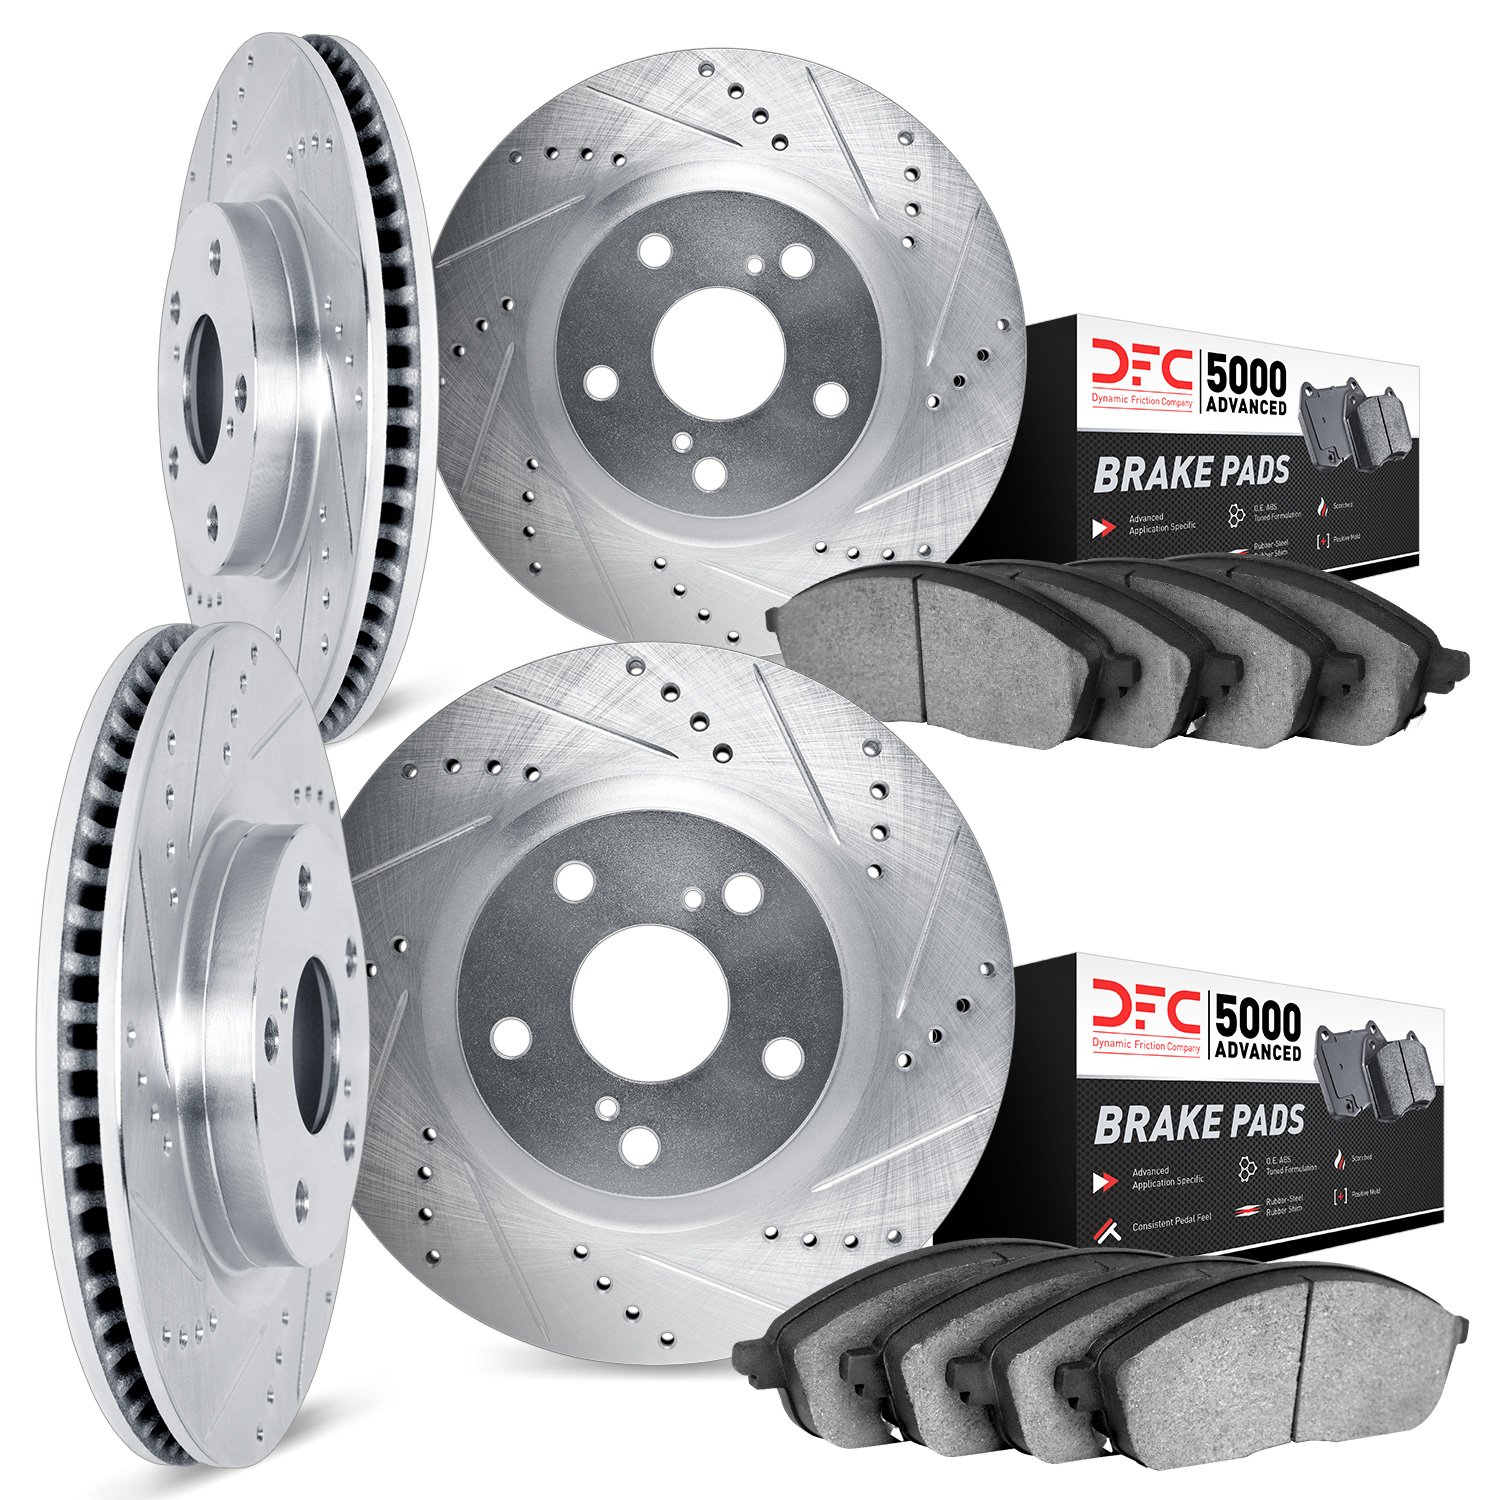 7504-75021 Drilled/Slotted Brake Rotors w/5000 Advanced Brake Pads Kit [Silver], 2007-2017 Lexus/Toyota/Scion, Position: Front a